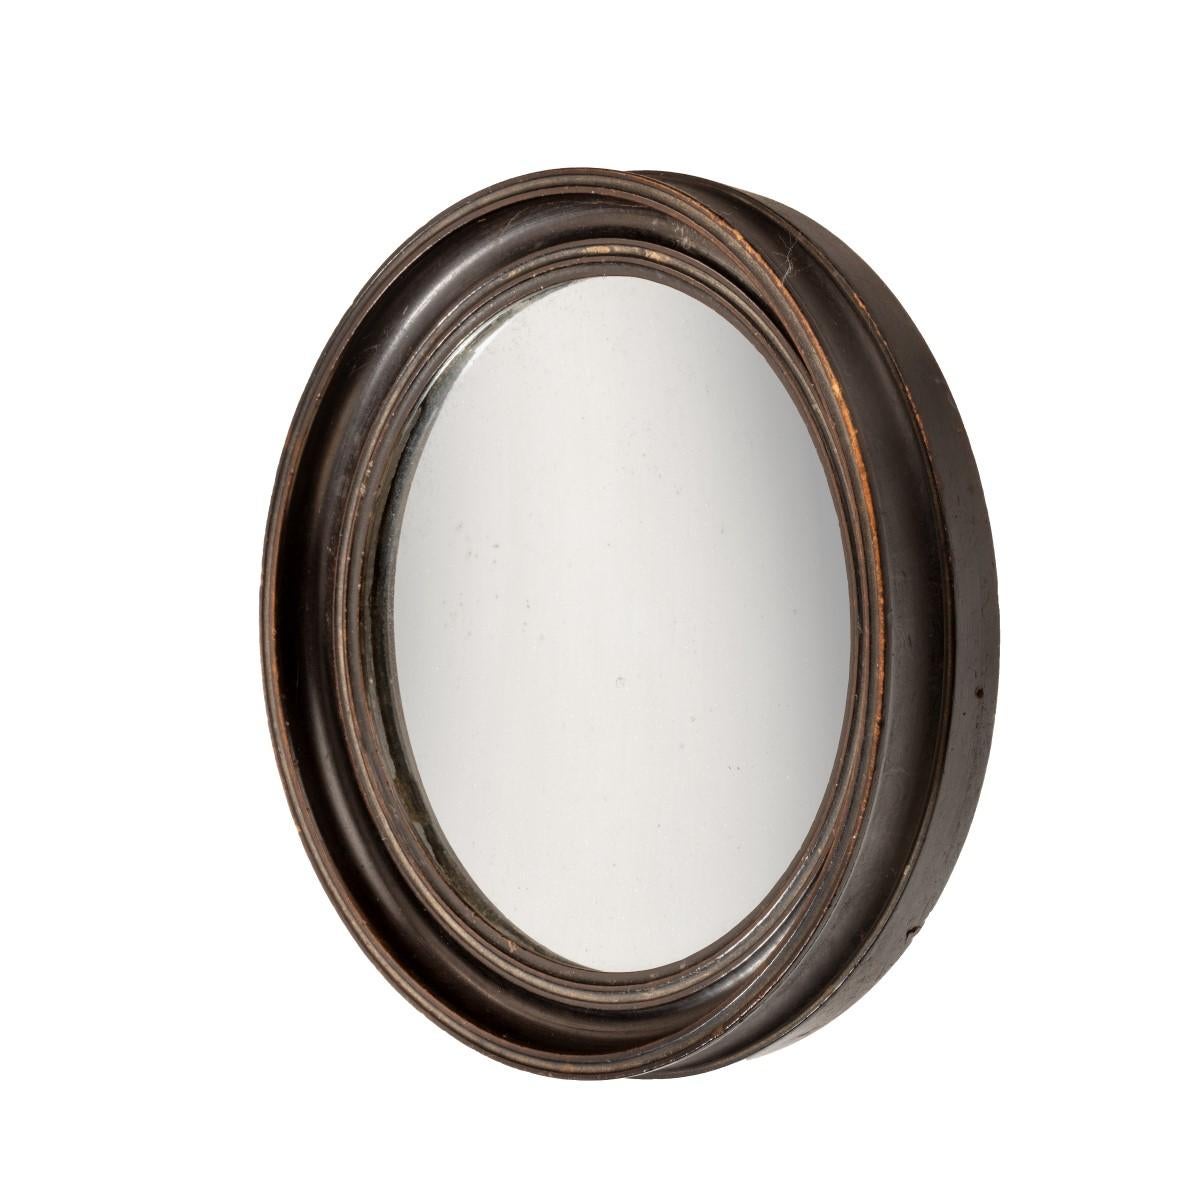 This concave, circular shaving mirror is set in a moulded ebonized wood frame. The reverse has a printed trade label stating ‘J Abraham Optician & Mathematical Instrument Maker to his R. H. Duke of Gloucester & His Grace the Duke of Wellington. 7